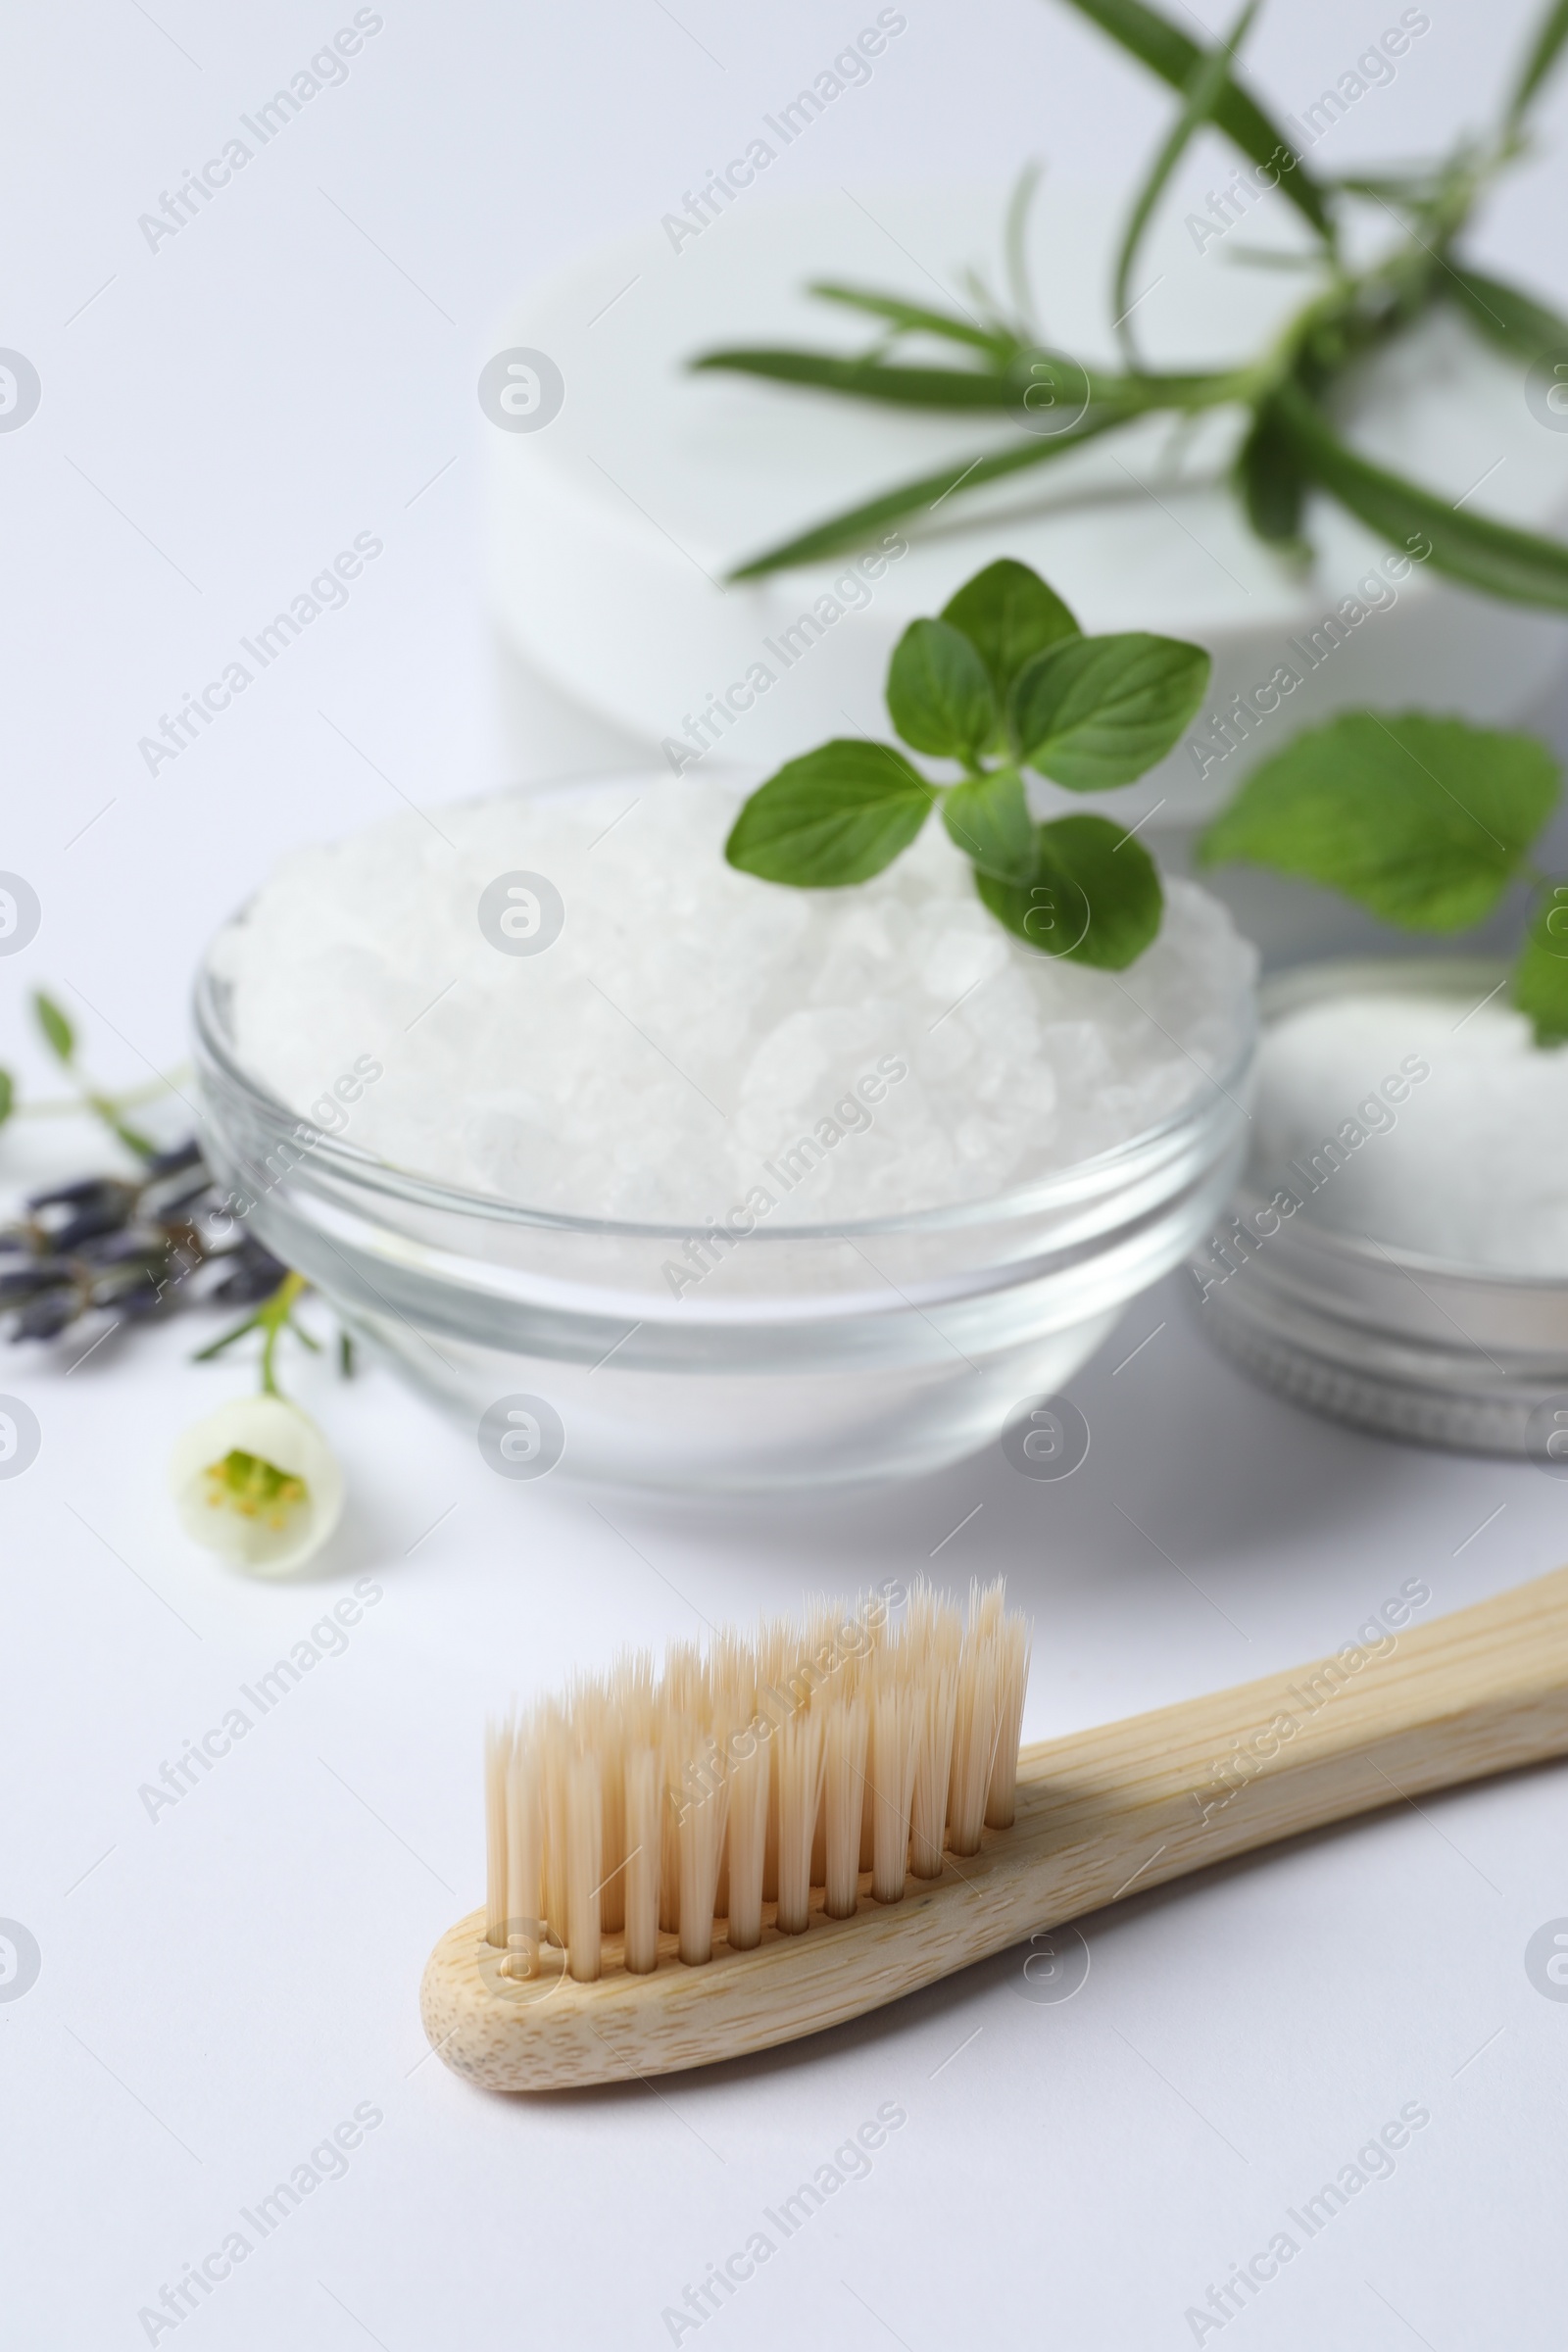 Photo of Toothbrush, sea salt, dry flowers and green herbs on white background, closeup